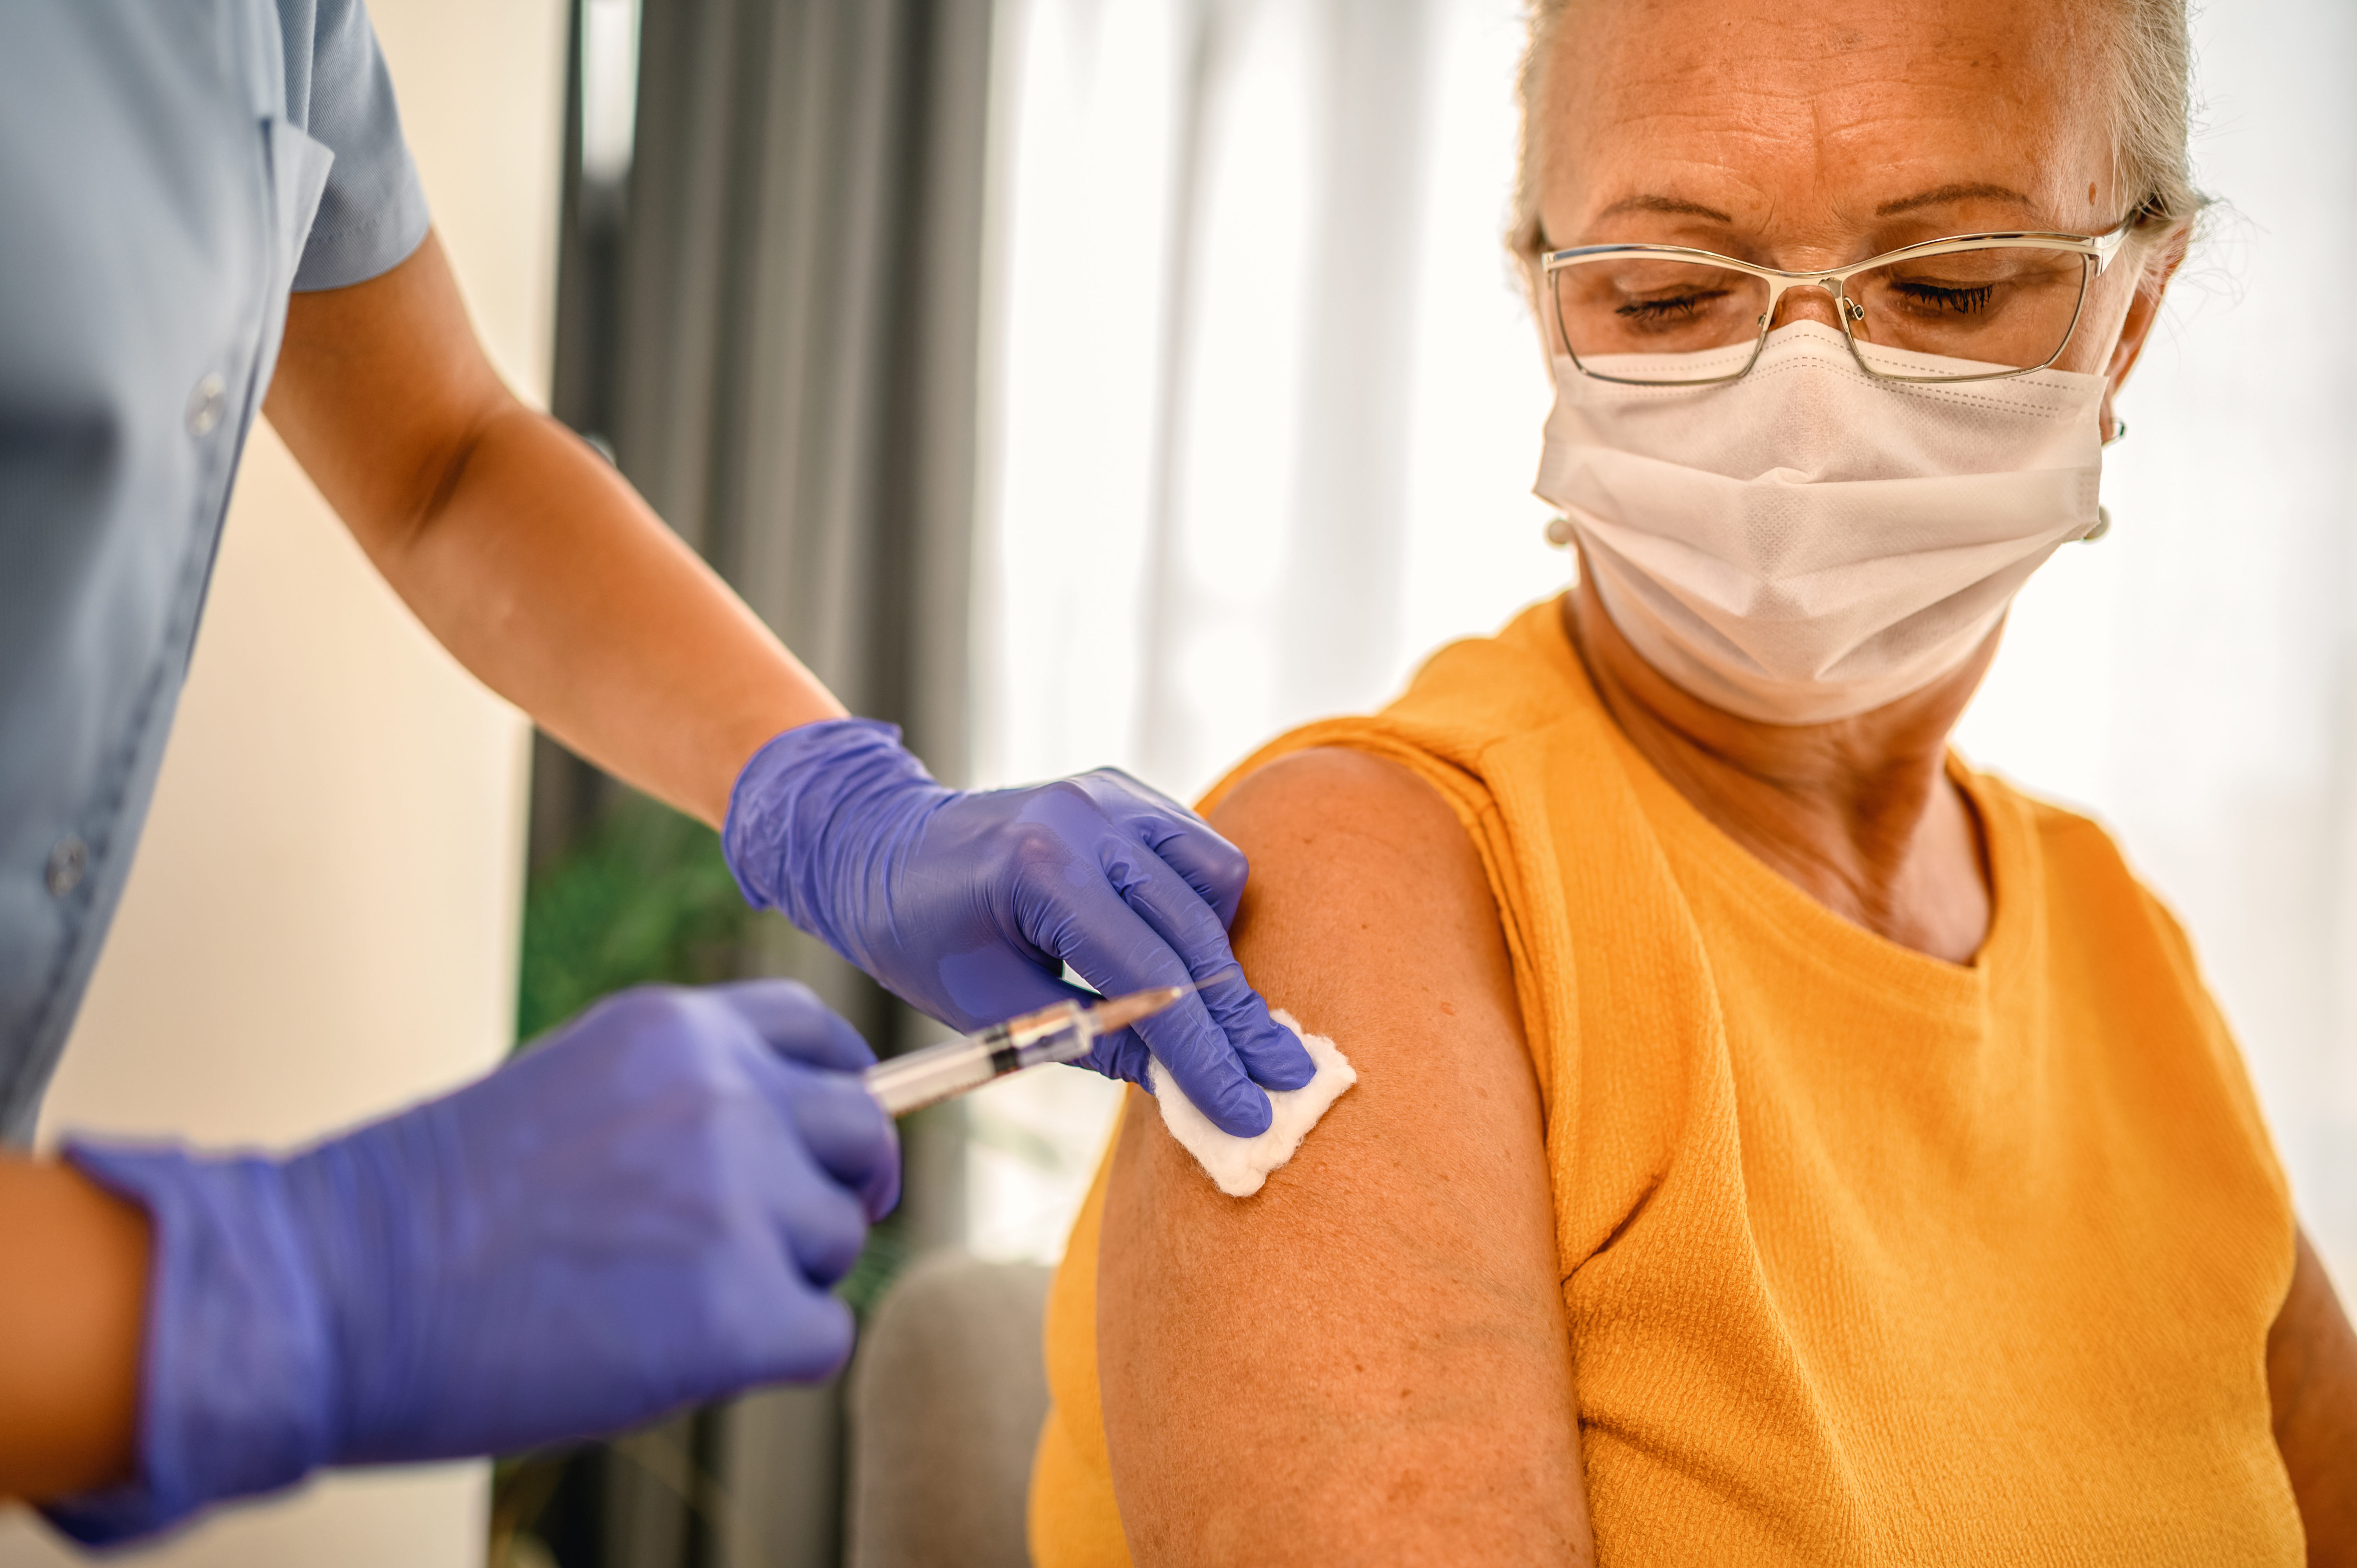 Vaccination as protection against viruses